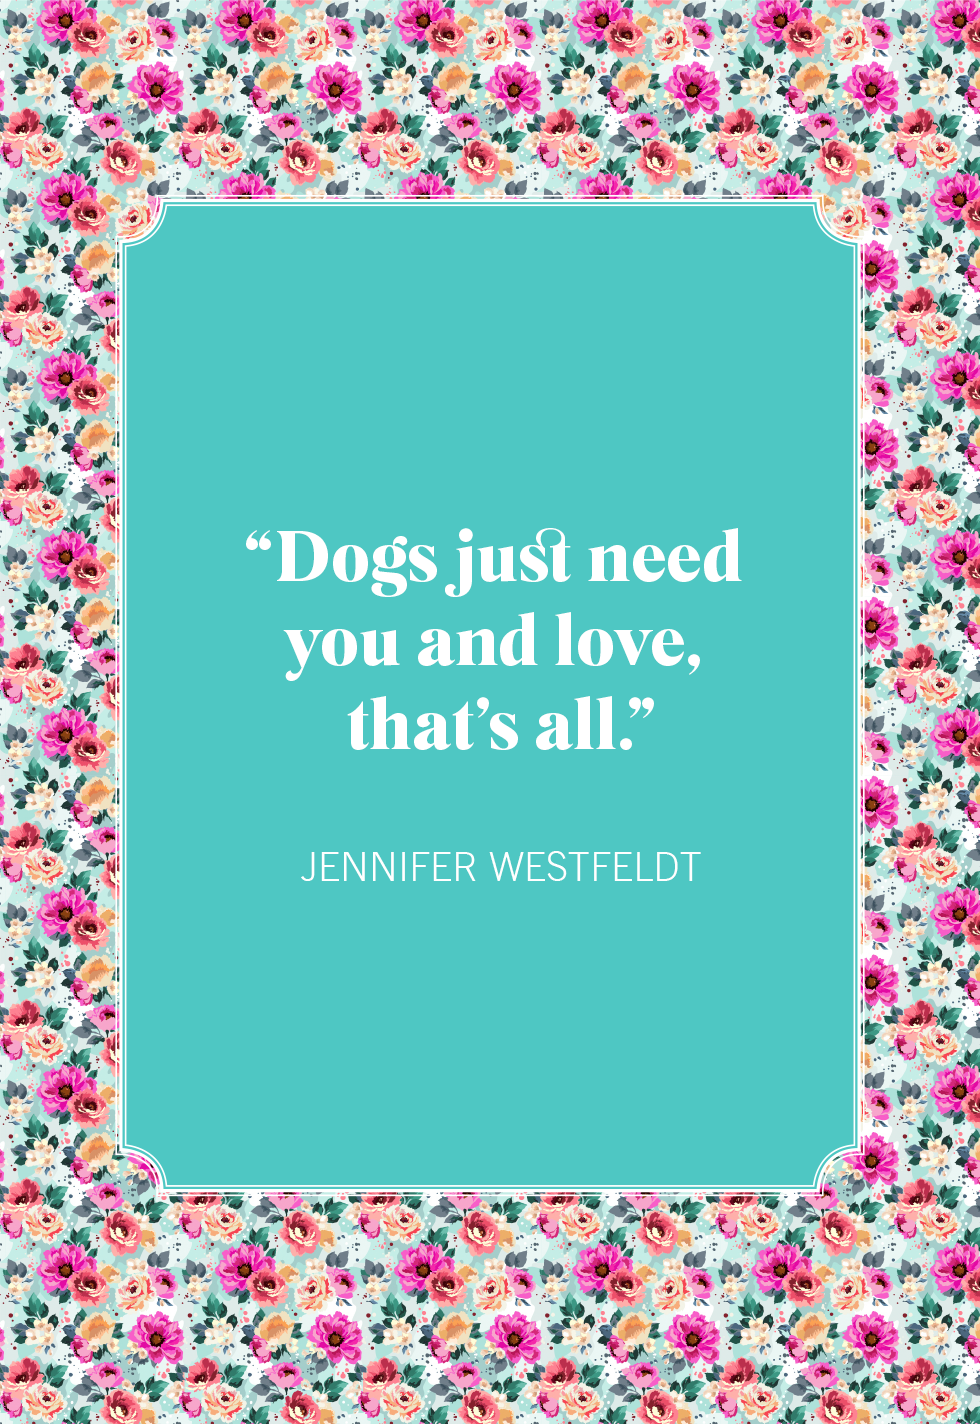 best dog mom quotes